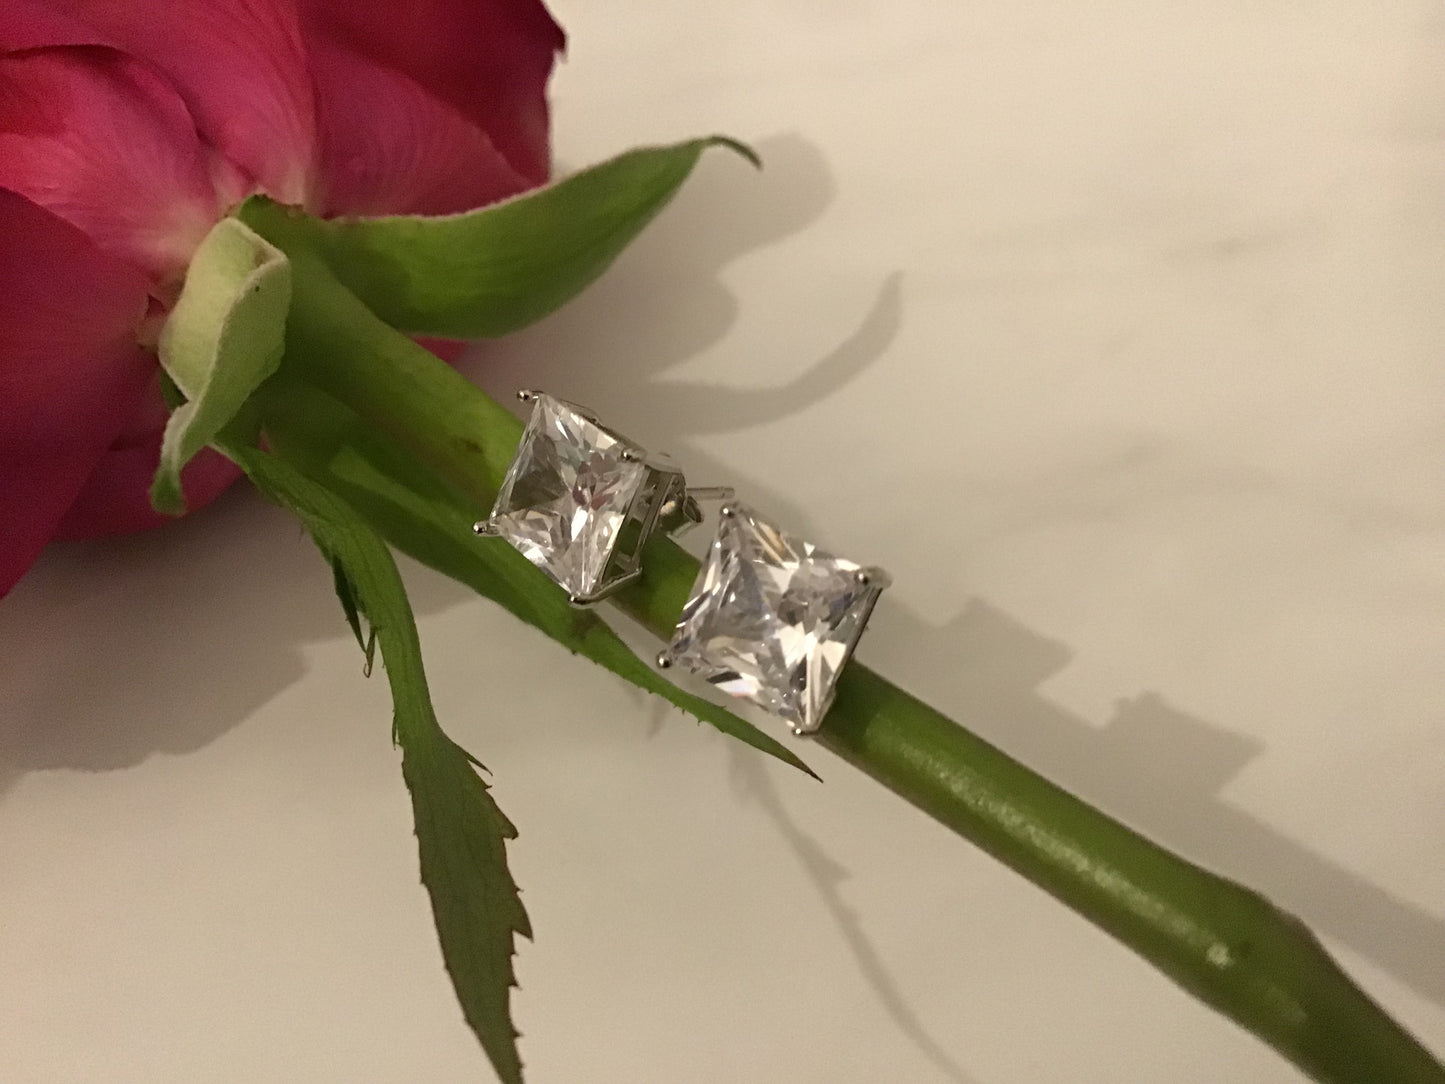 Genuine 925 Sterling Silver with square CZ (cubic zirconia) Studs earrings.